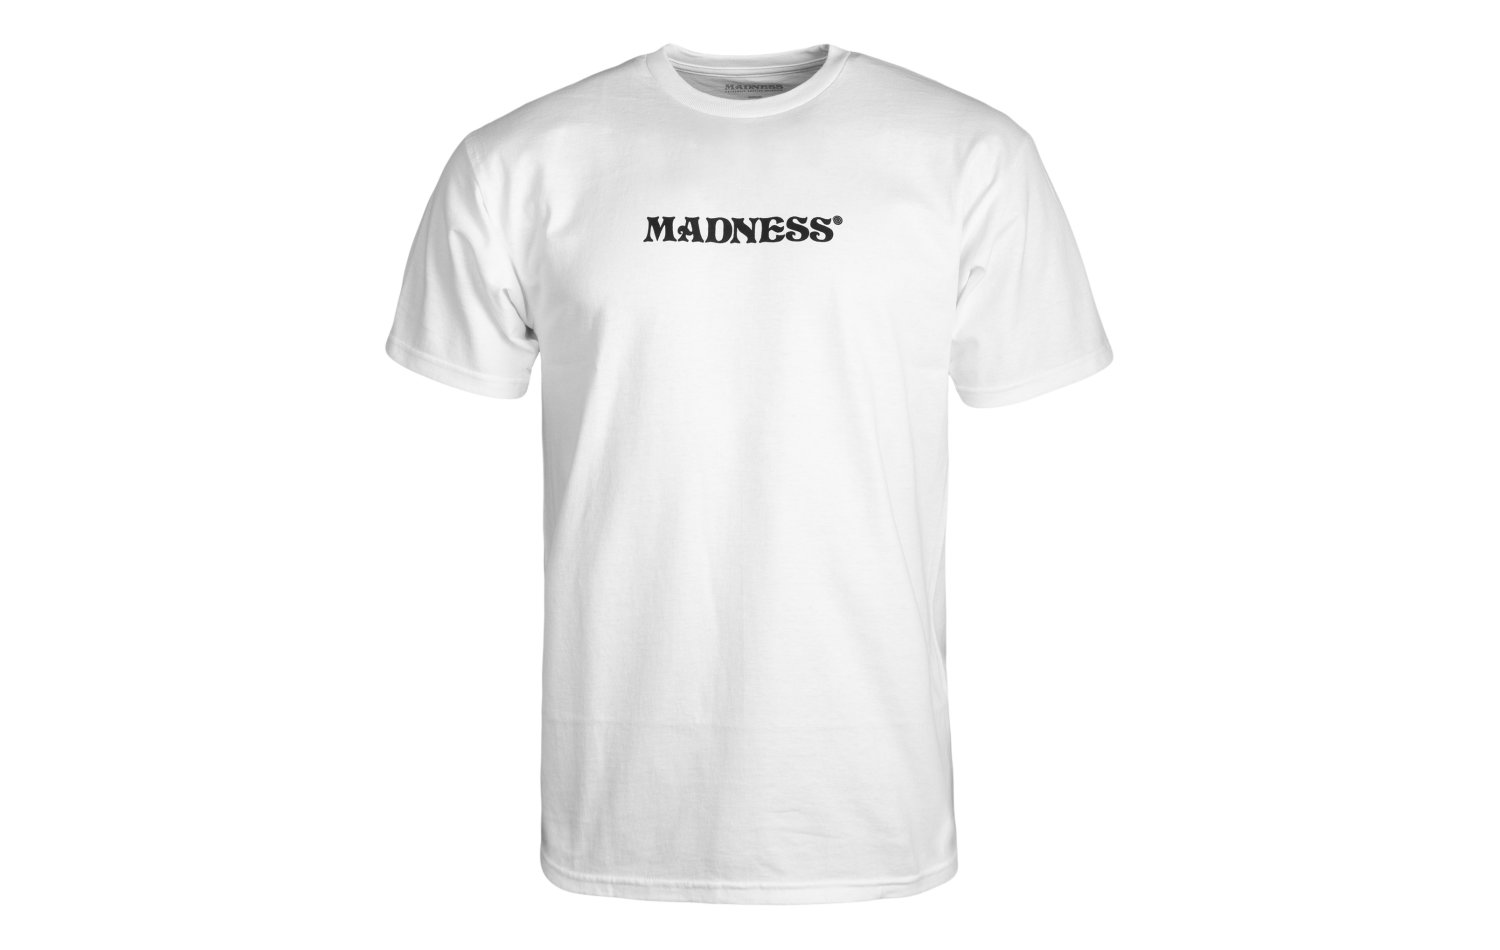 Madness Anxiety S/S (20076006)